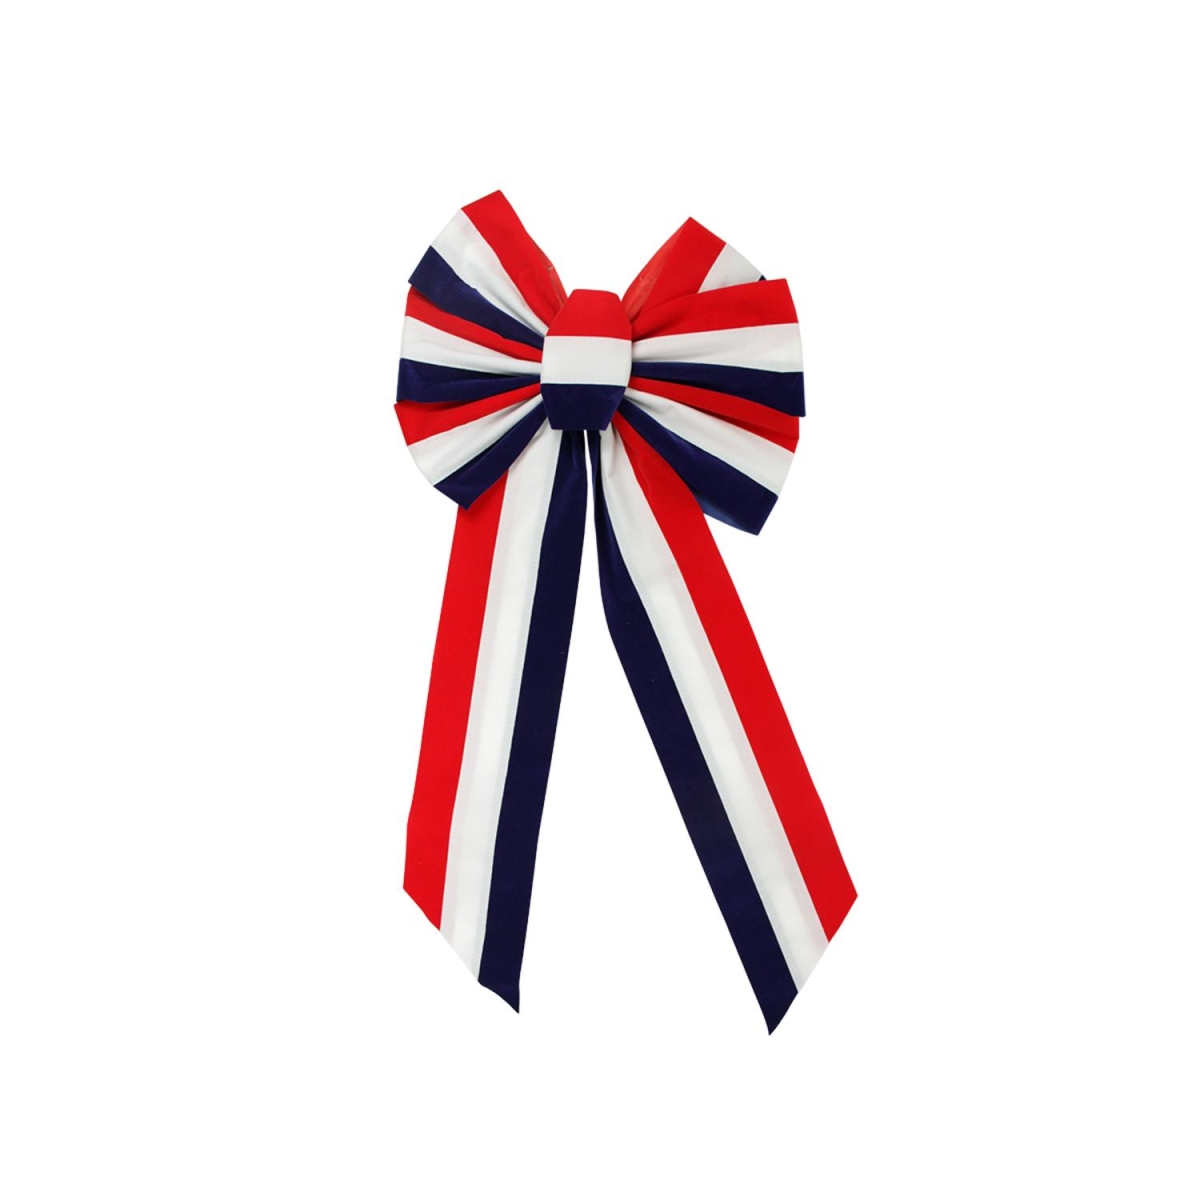 31364865 14 X 28 In. Large Red White & Blue Patriotic Striped Indoor Velveteen 6 Loop Wired Christmas Bow